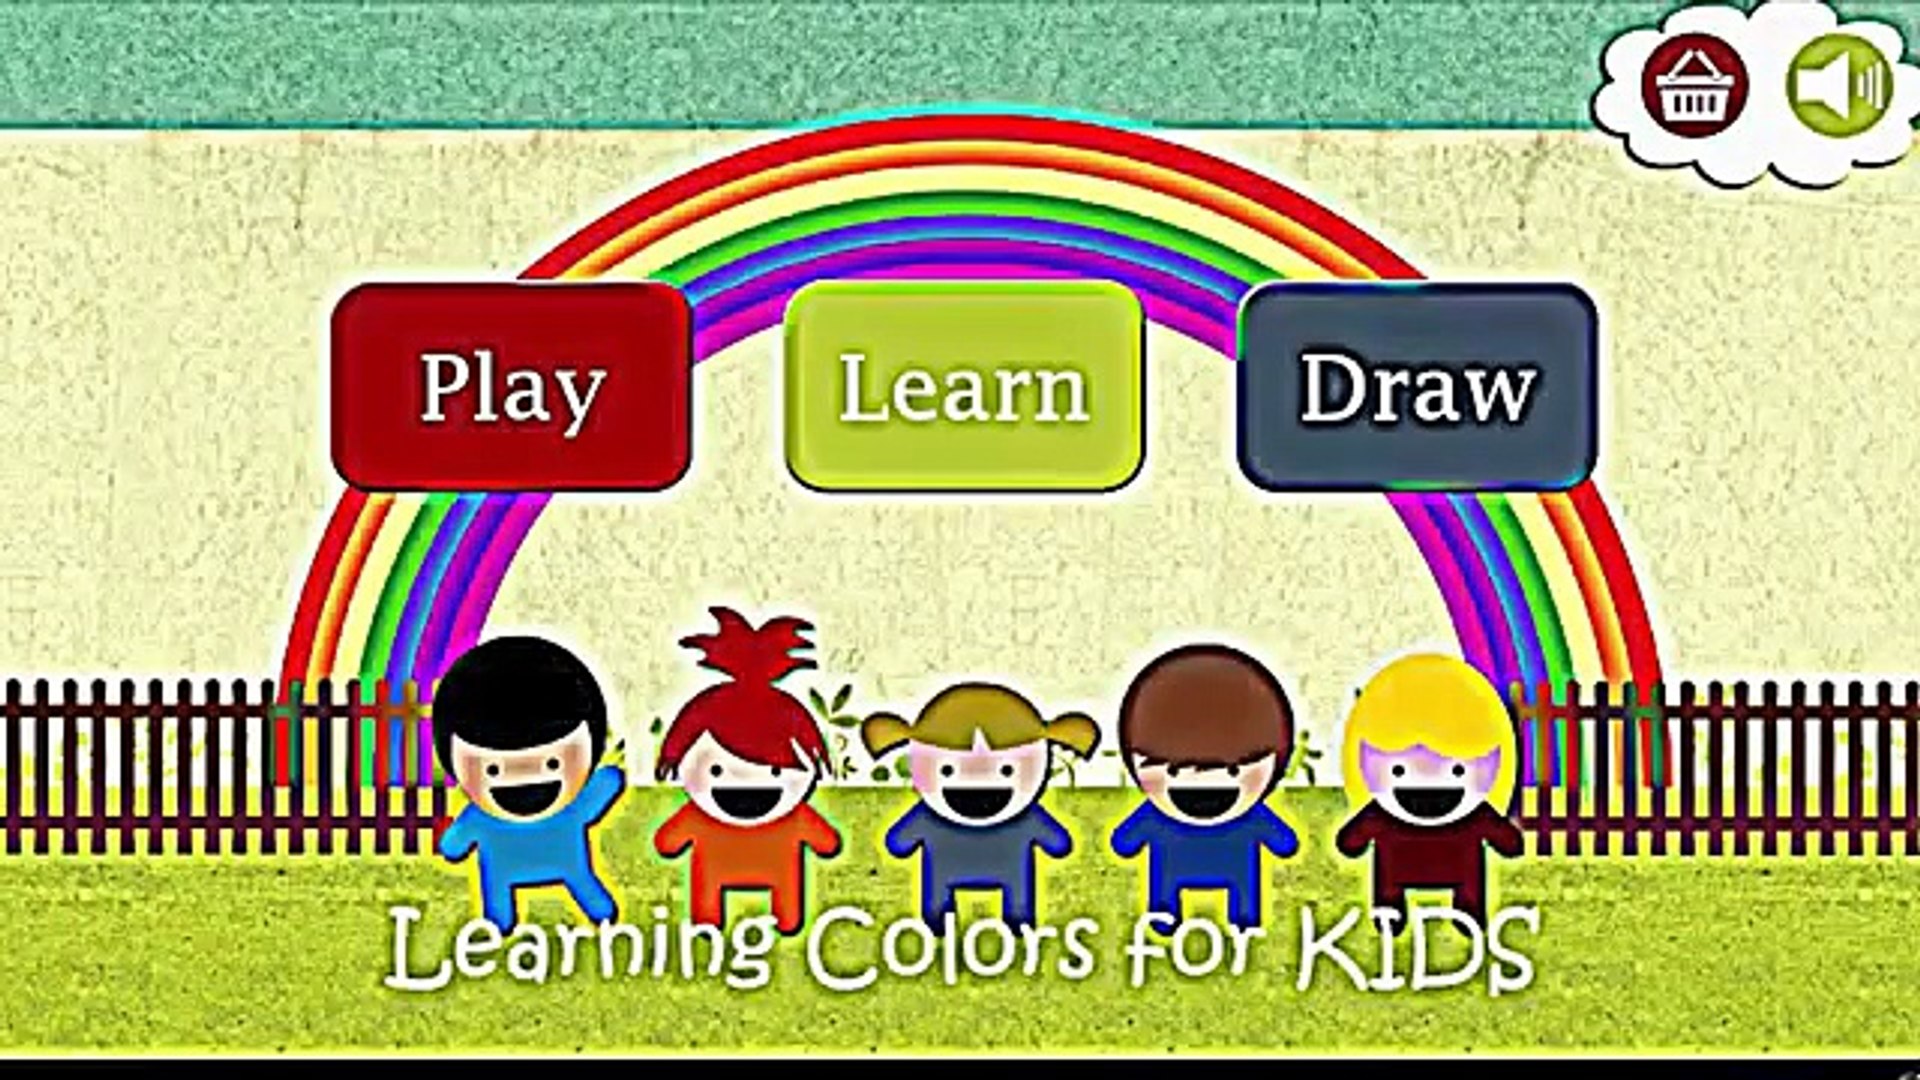 Learning Color Games for Kids to Play - Coloring Gameplay for Kids and Play